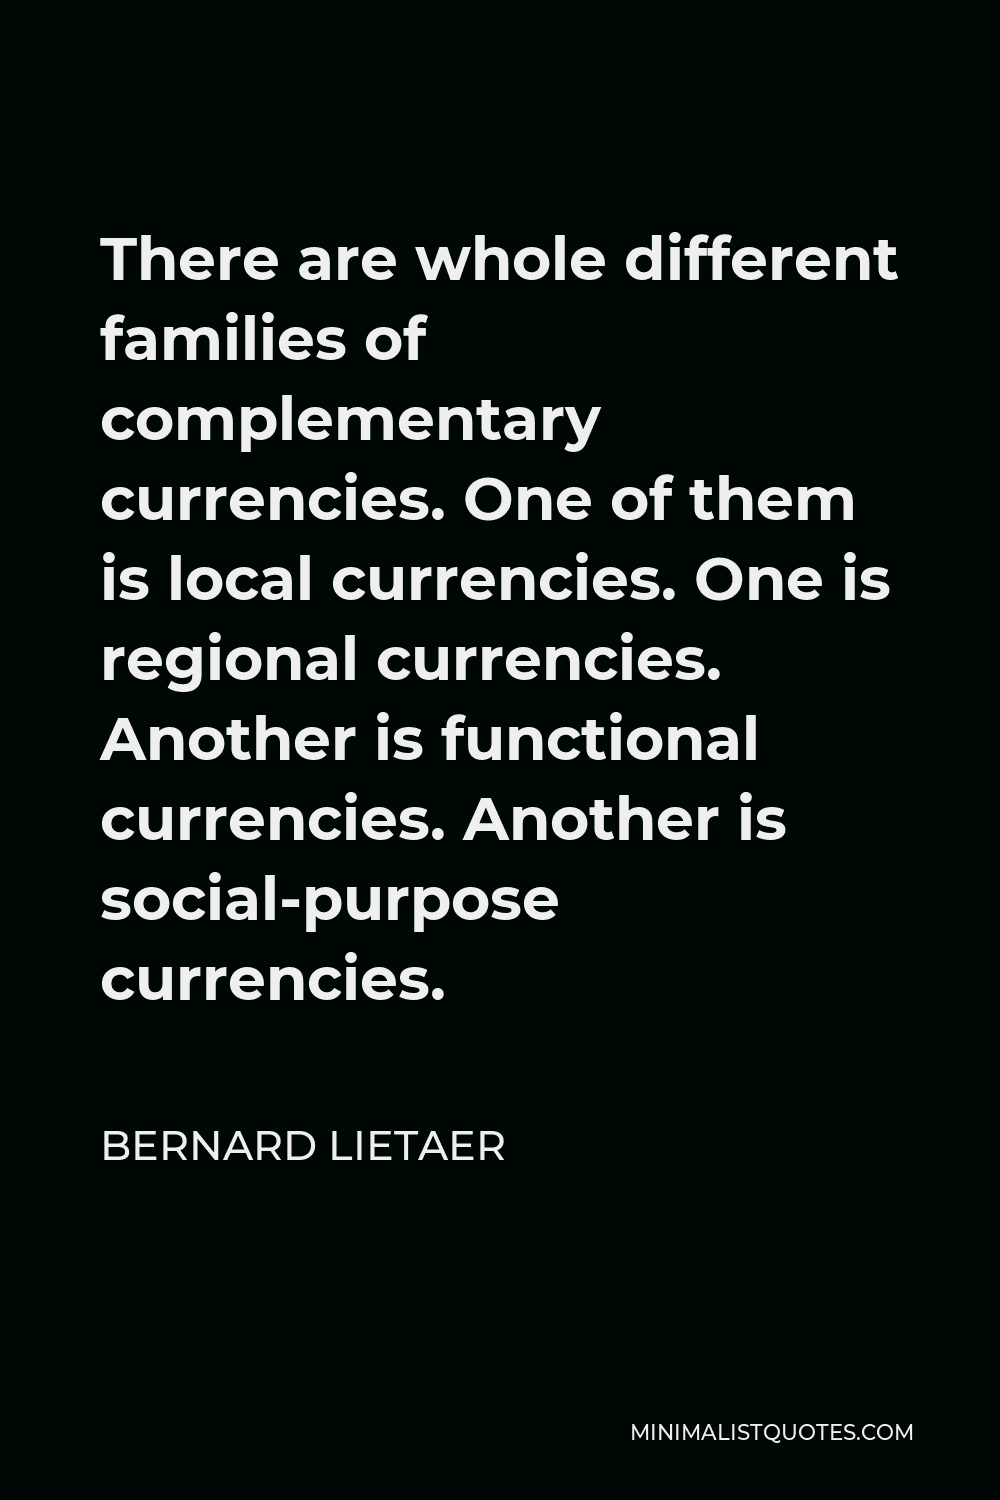 Bernard Lietaer Quote - There are whole different families of complementary currencies. One of them is local currencies. One is regional currencies. Another is functional currencies. Another is social-purpose currencies.